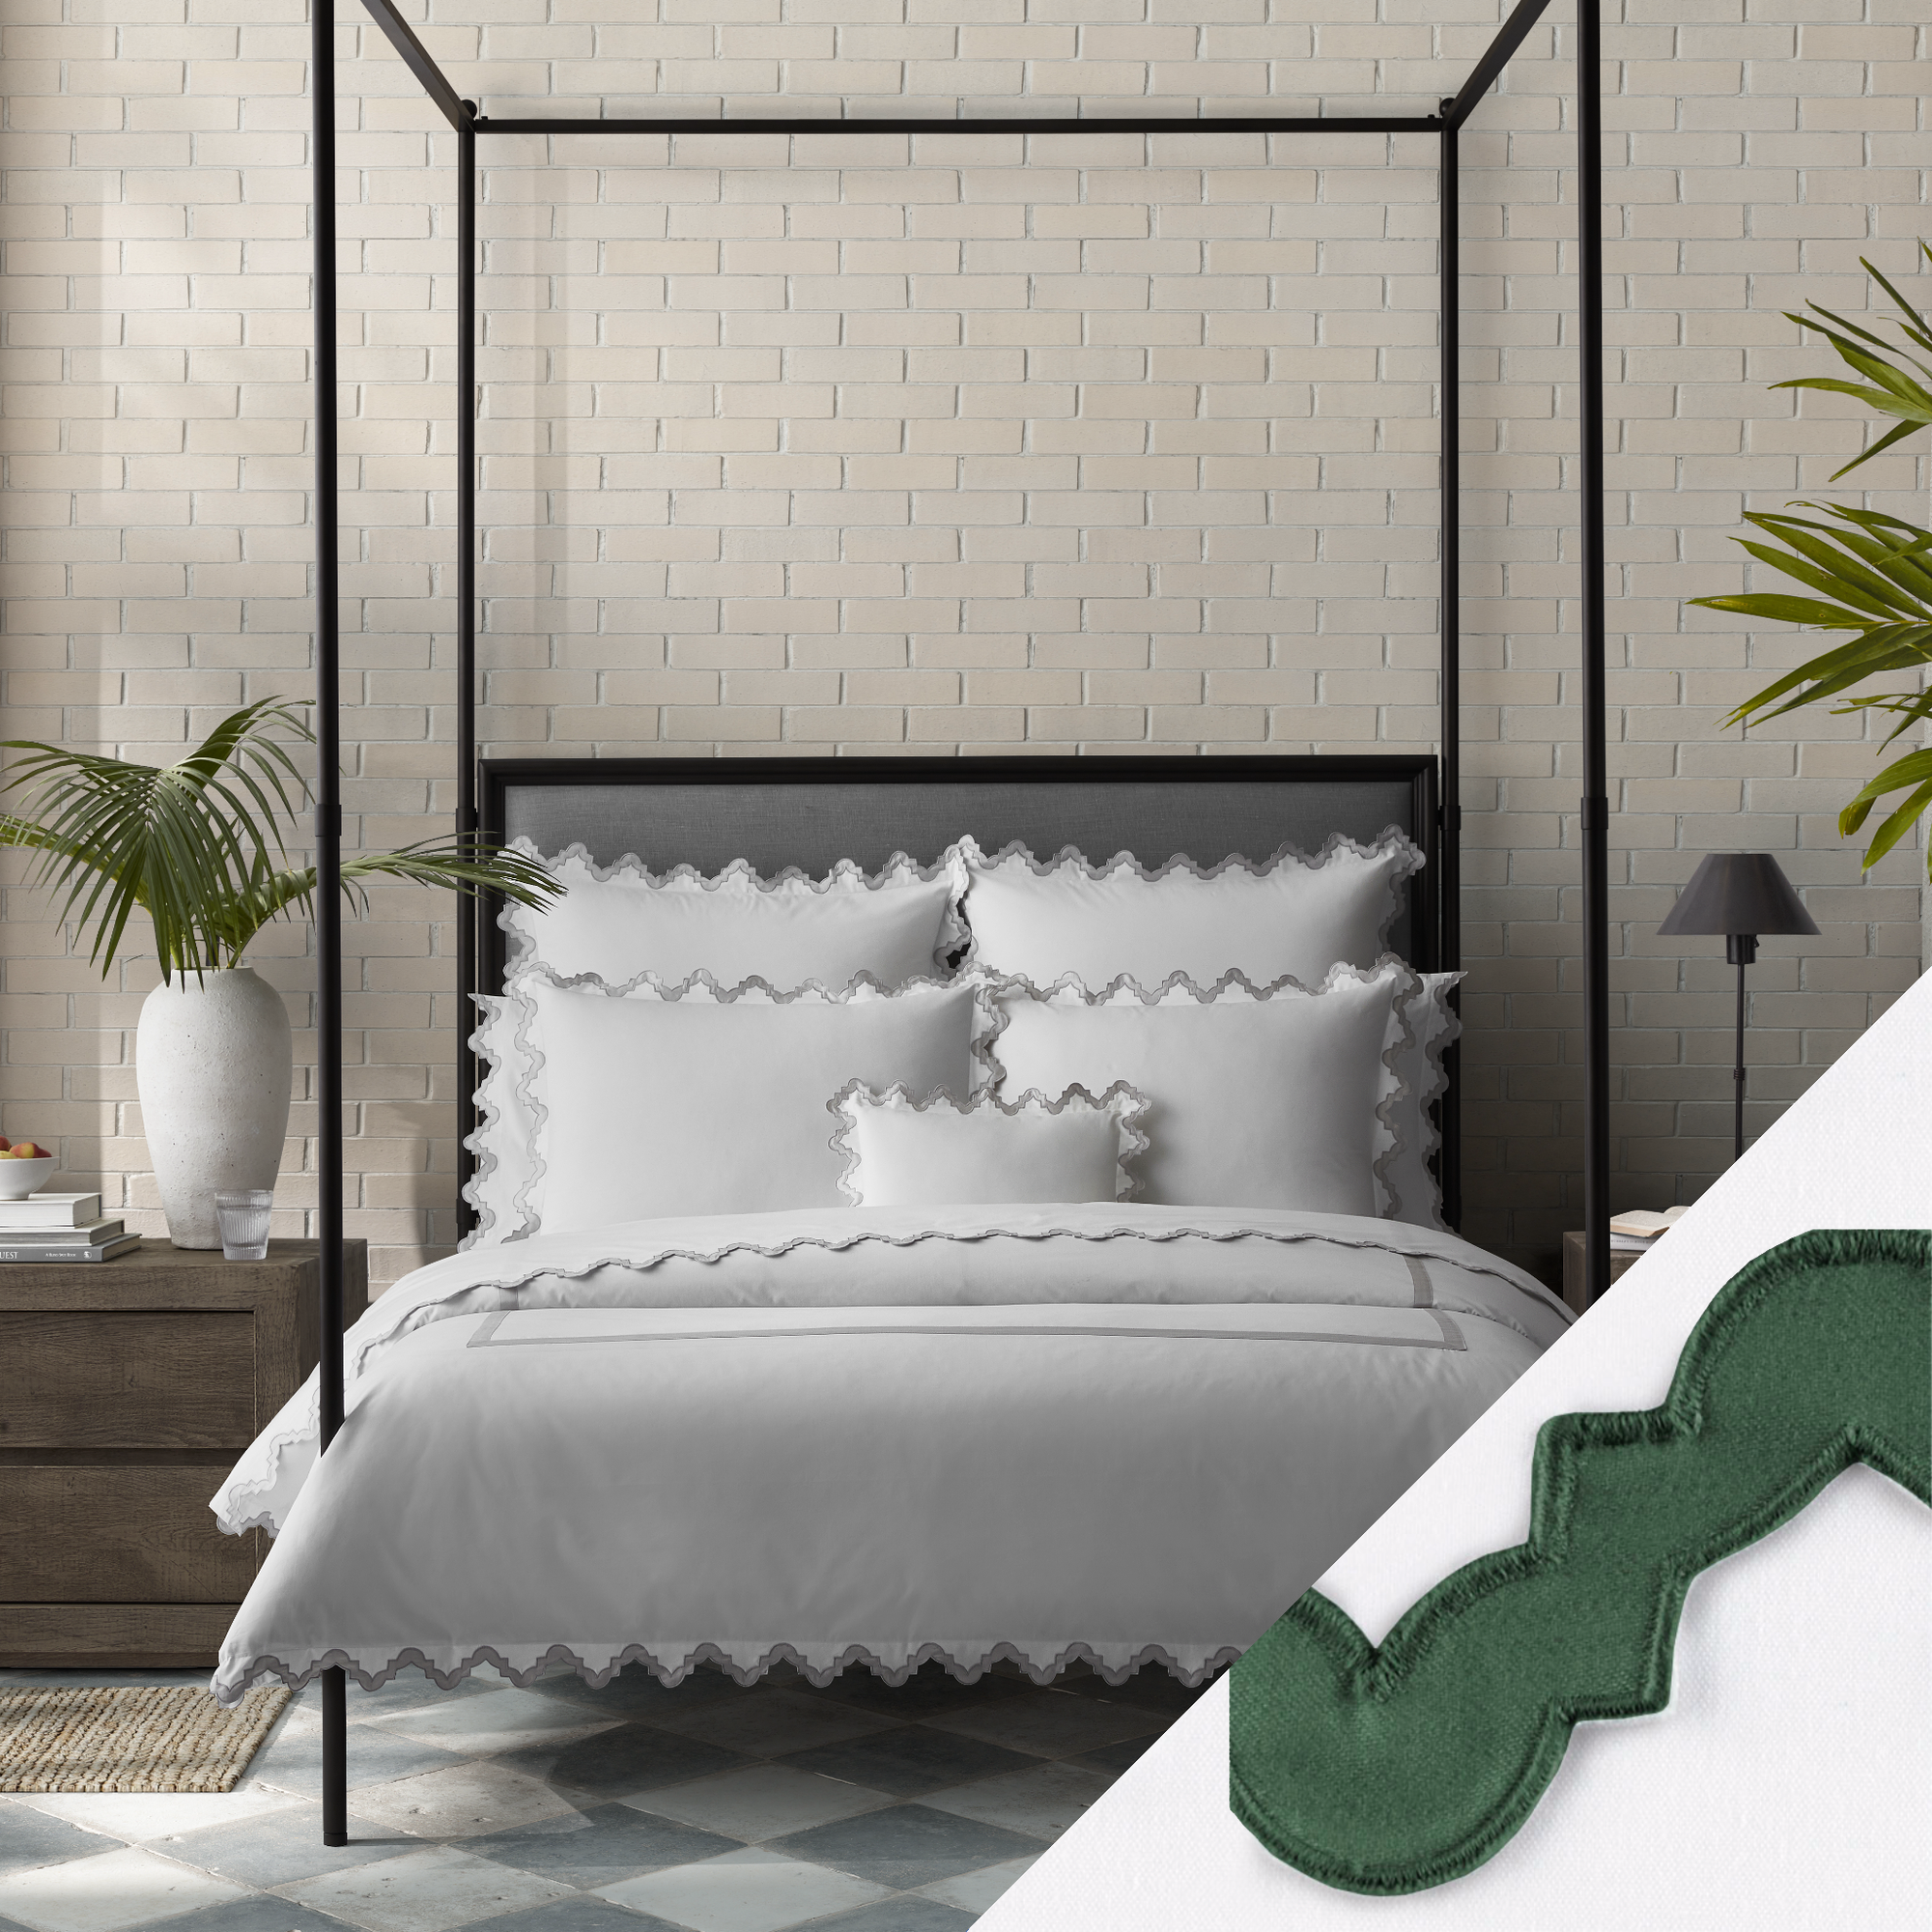 Lifestyle Image of a Full Bed Dressed in Matouk Aziza Bedding in Silver Color with Green Swatch